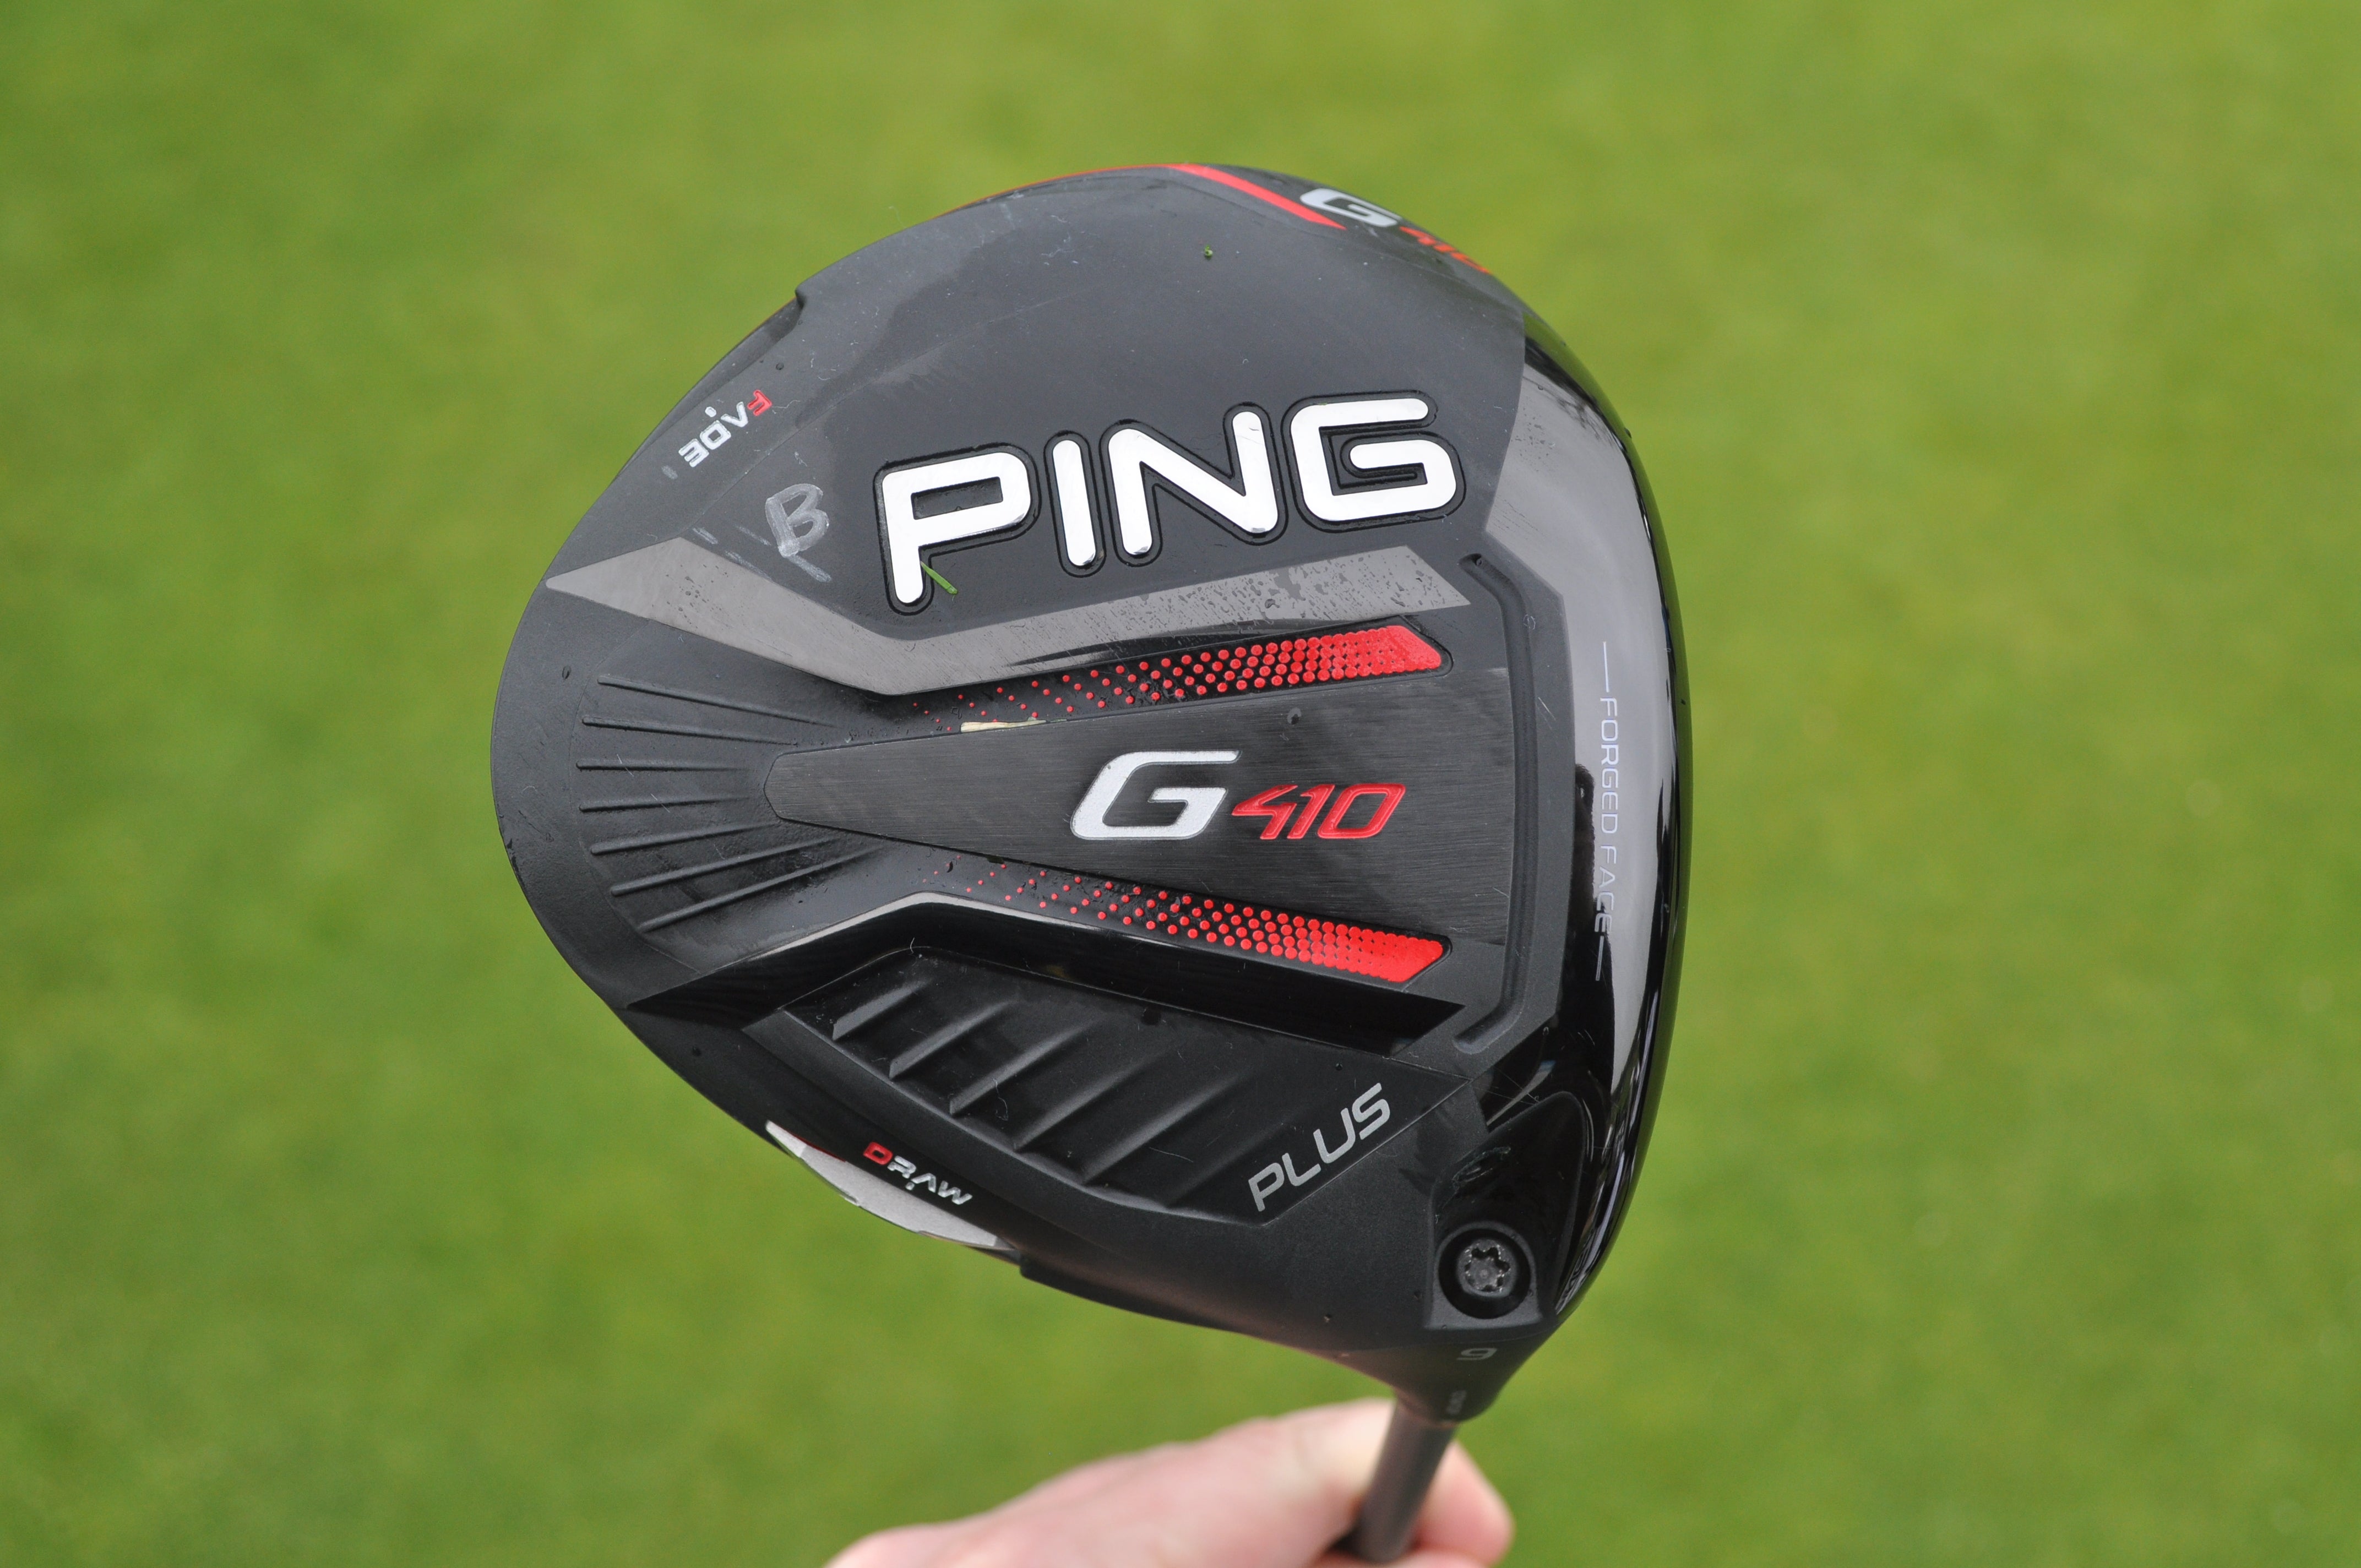 Cameron Champ is back in Ping's G410 Plus driver after increasing the loft from 7.9 to 8.9 degrees to help with launch. 